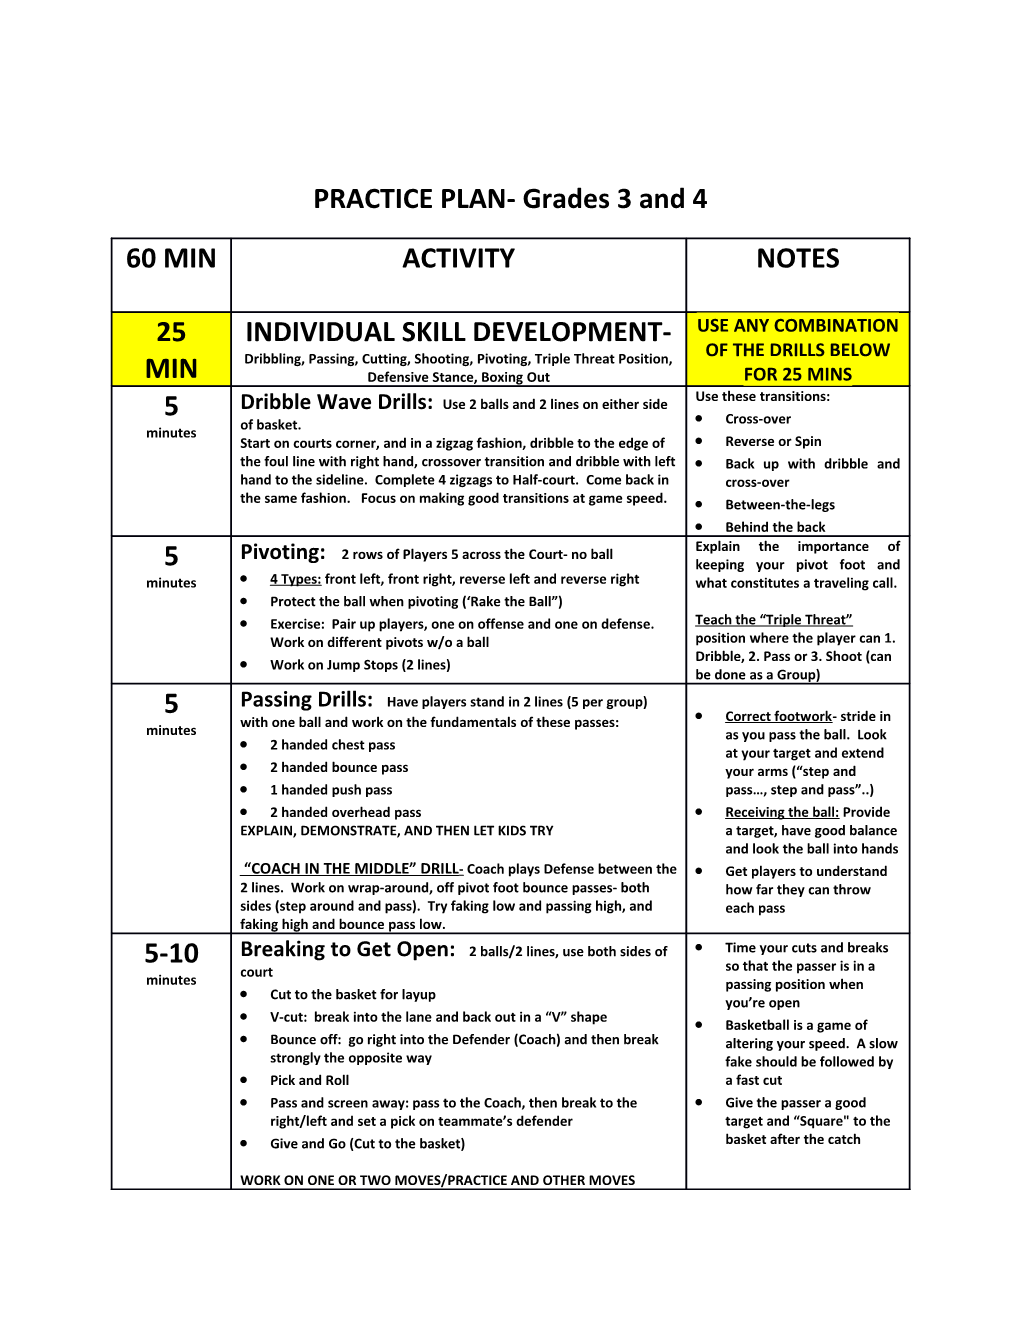 PRACTICE PLAN- Grades 3 and 4